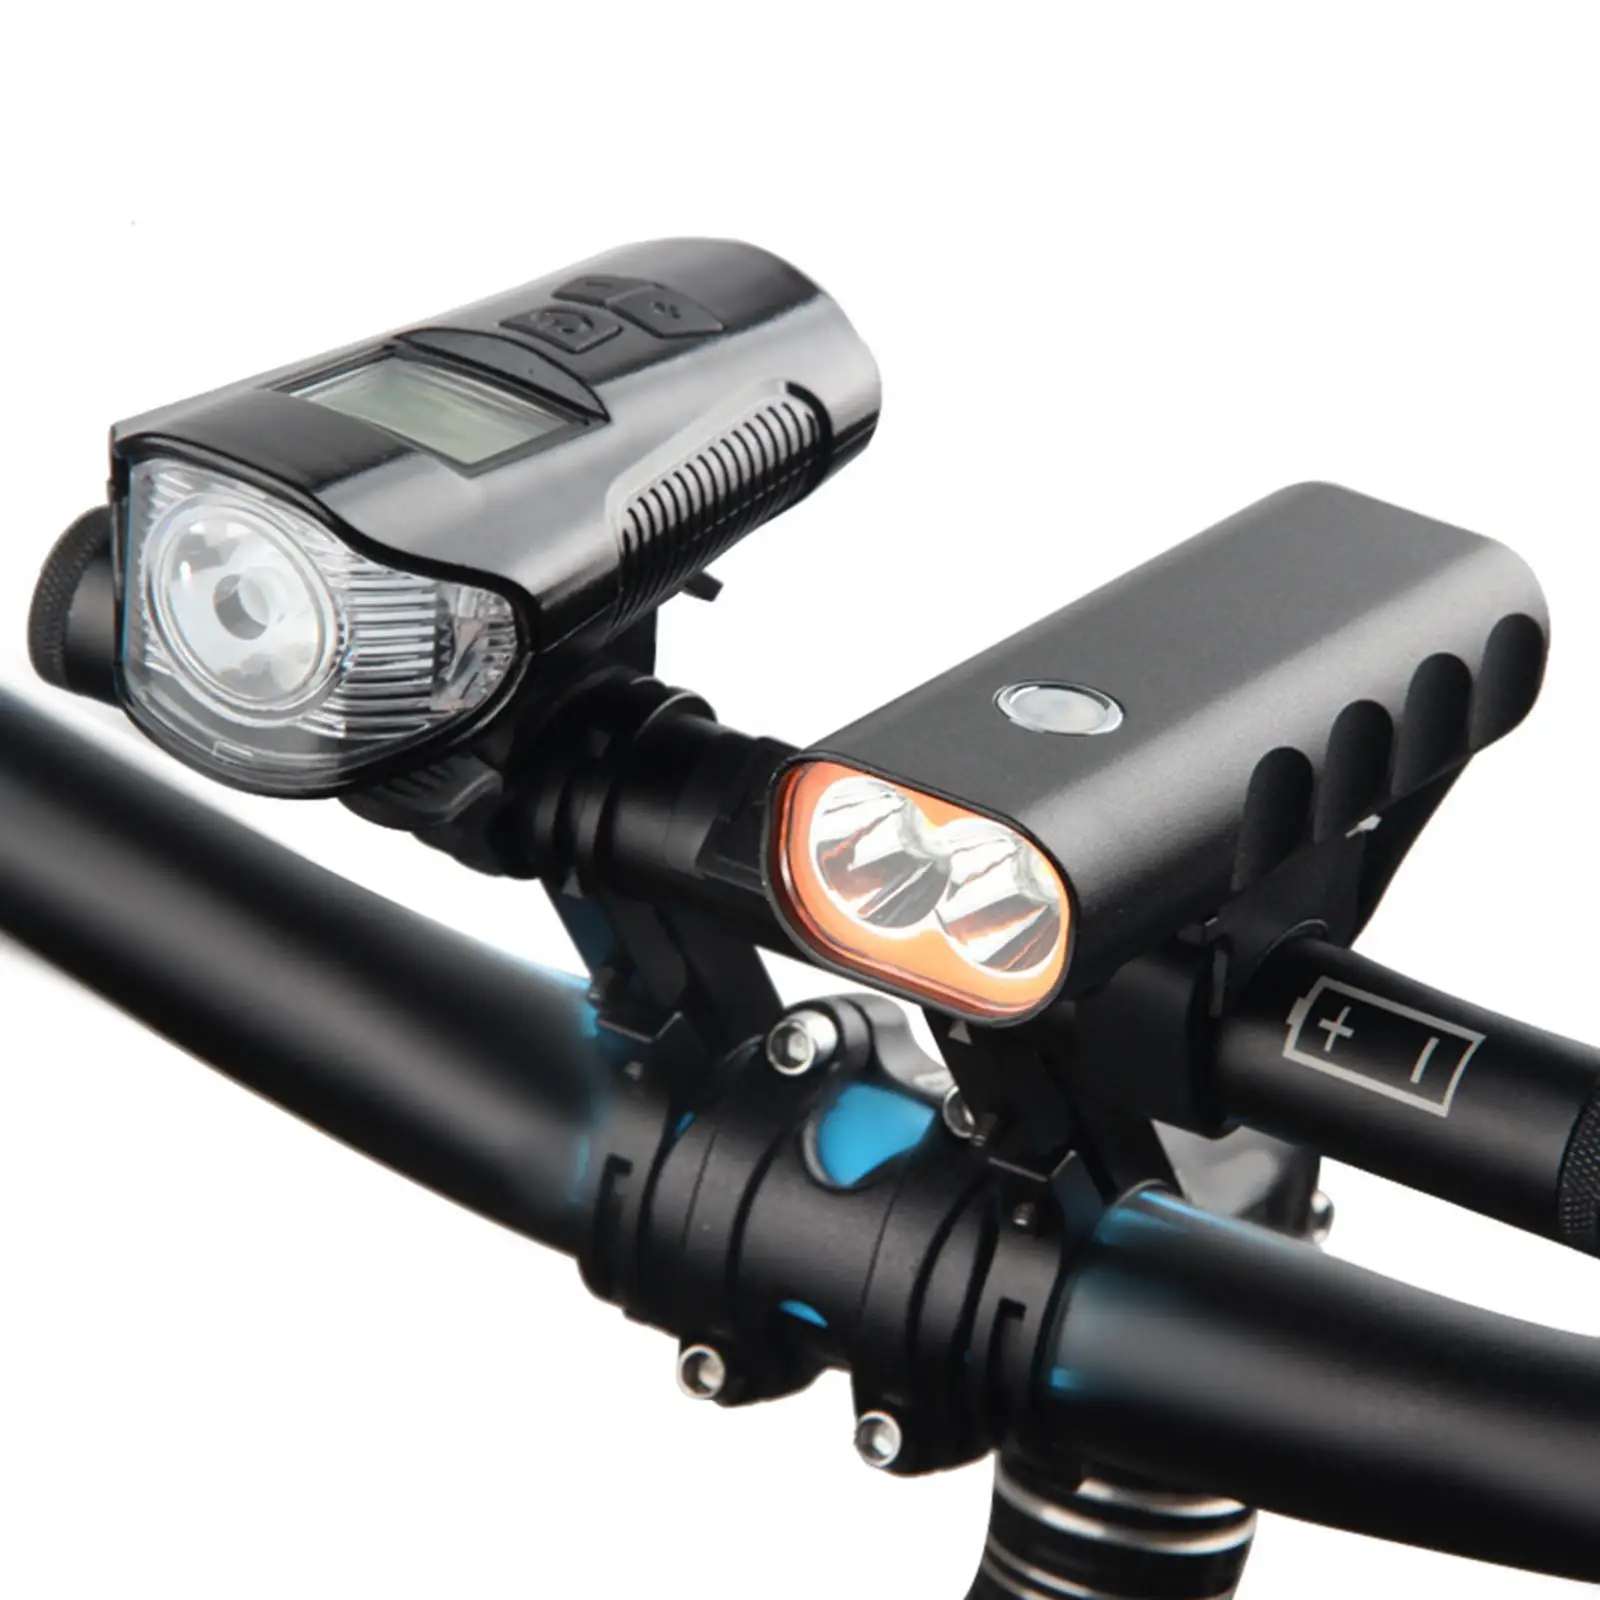 Rechargeable Bike Handlebar Extender USB Charging Bicycle Handle Bar Extension for Holding Speedometer Light Headlight Phone